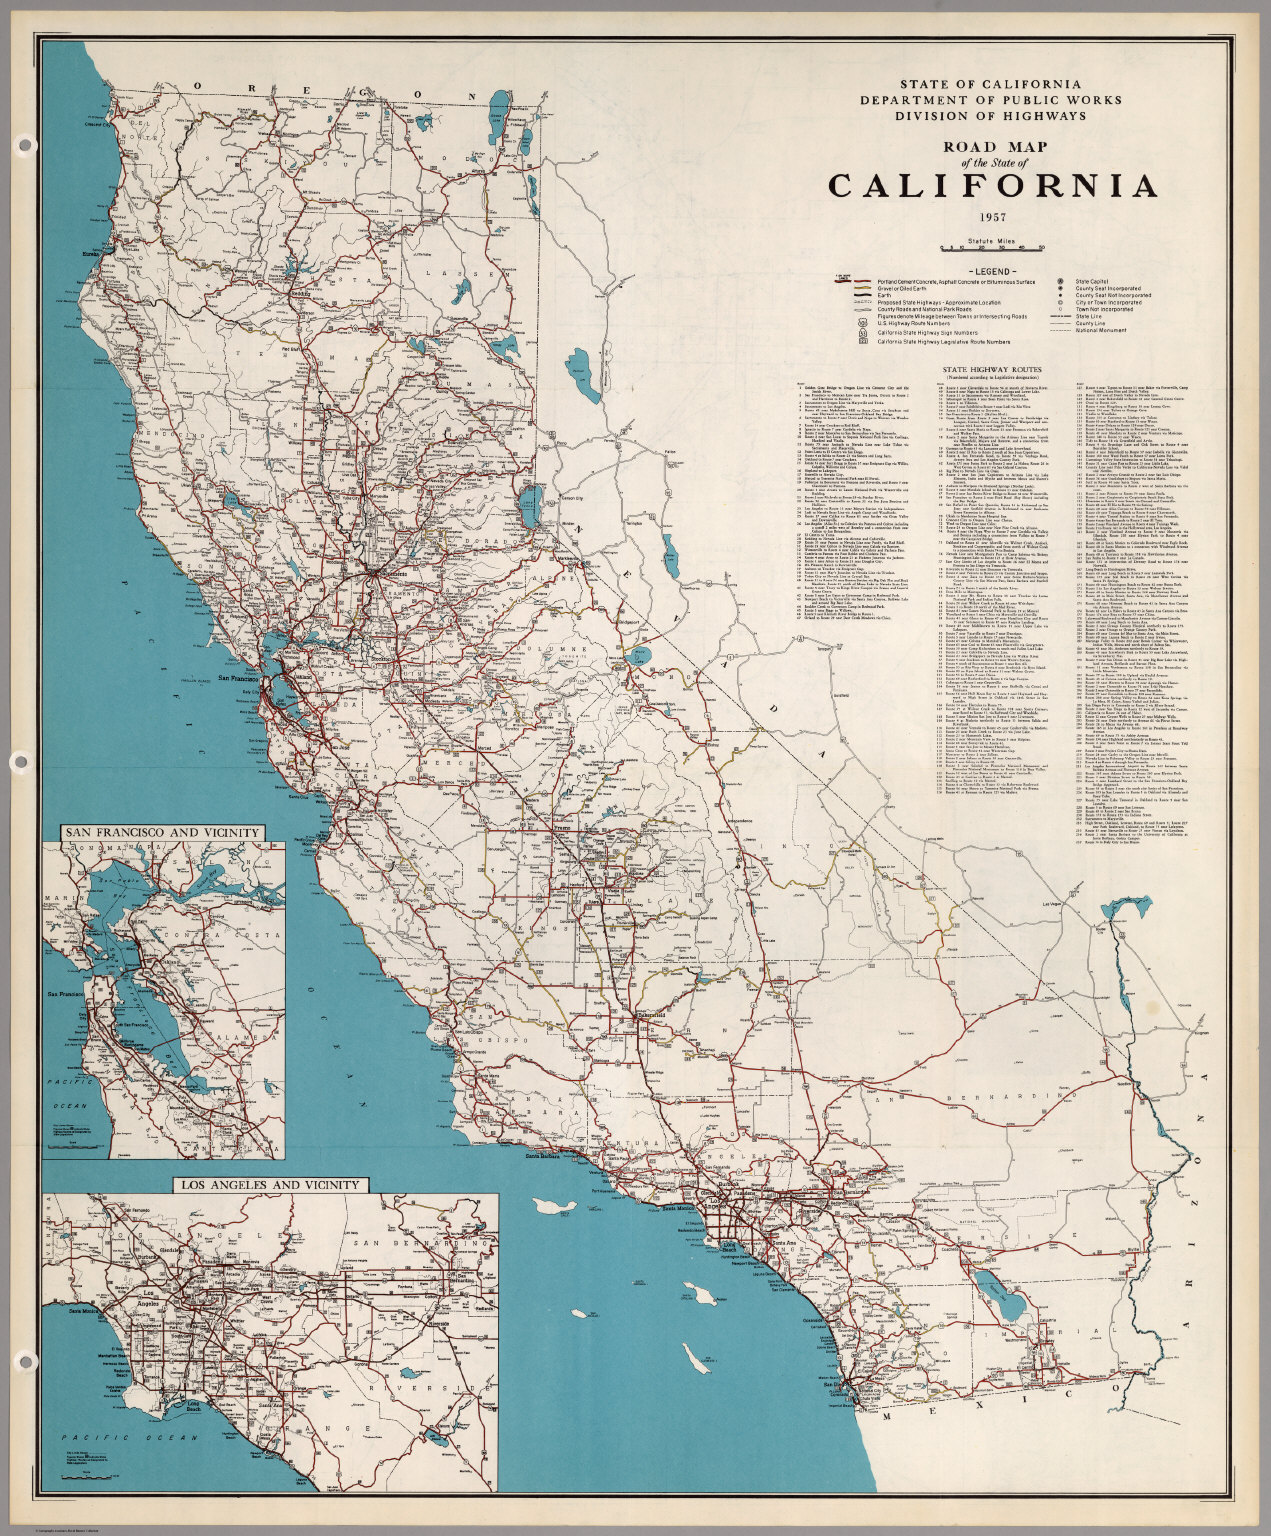 Road Map of the State of California, 1957.